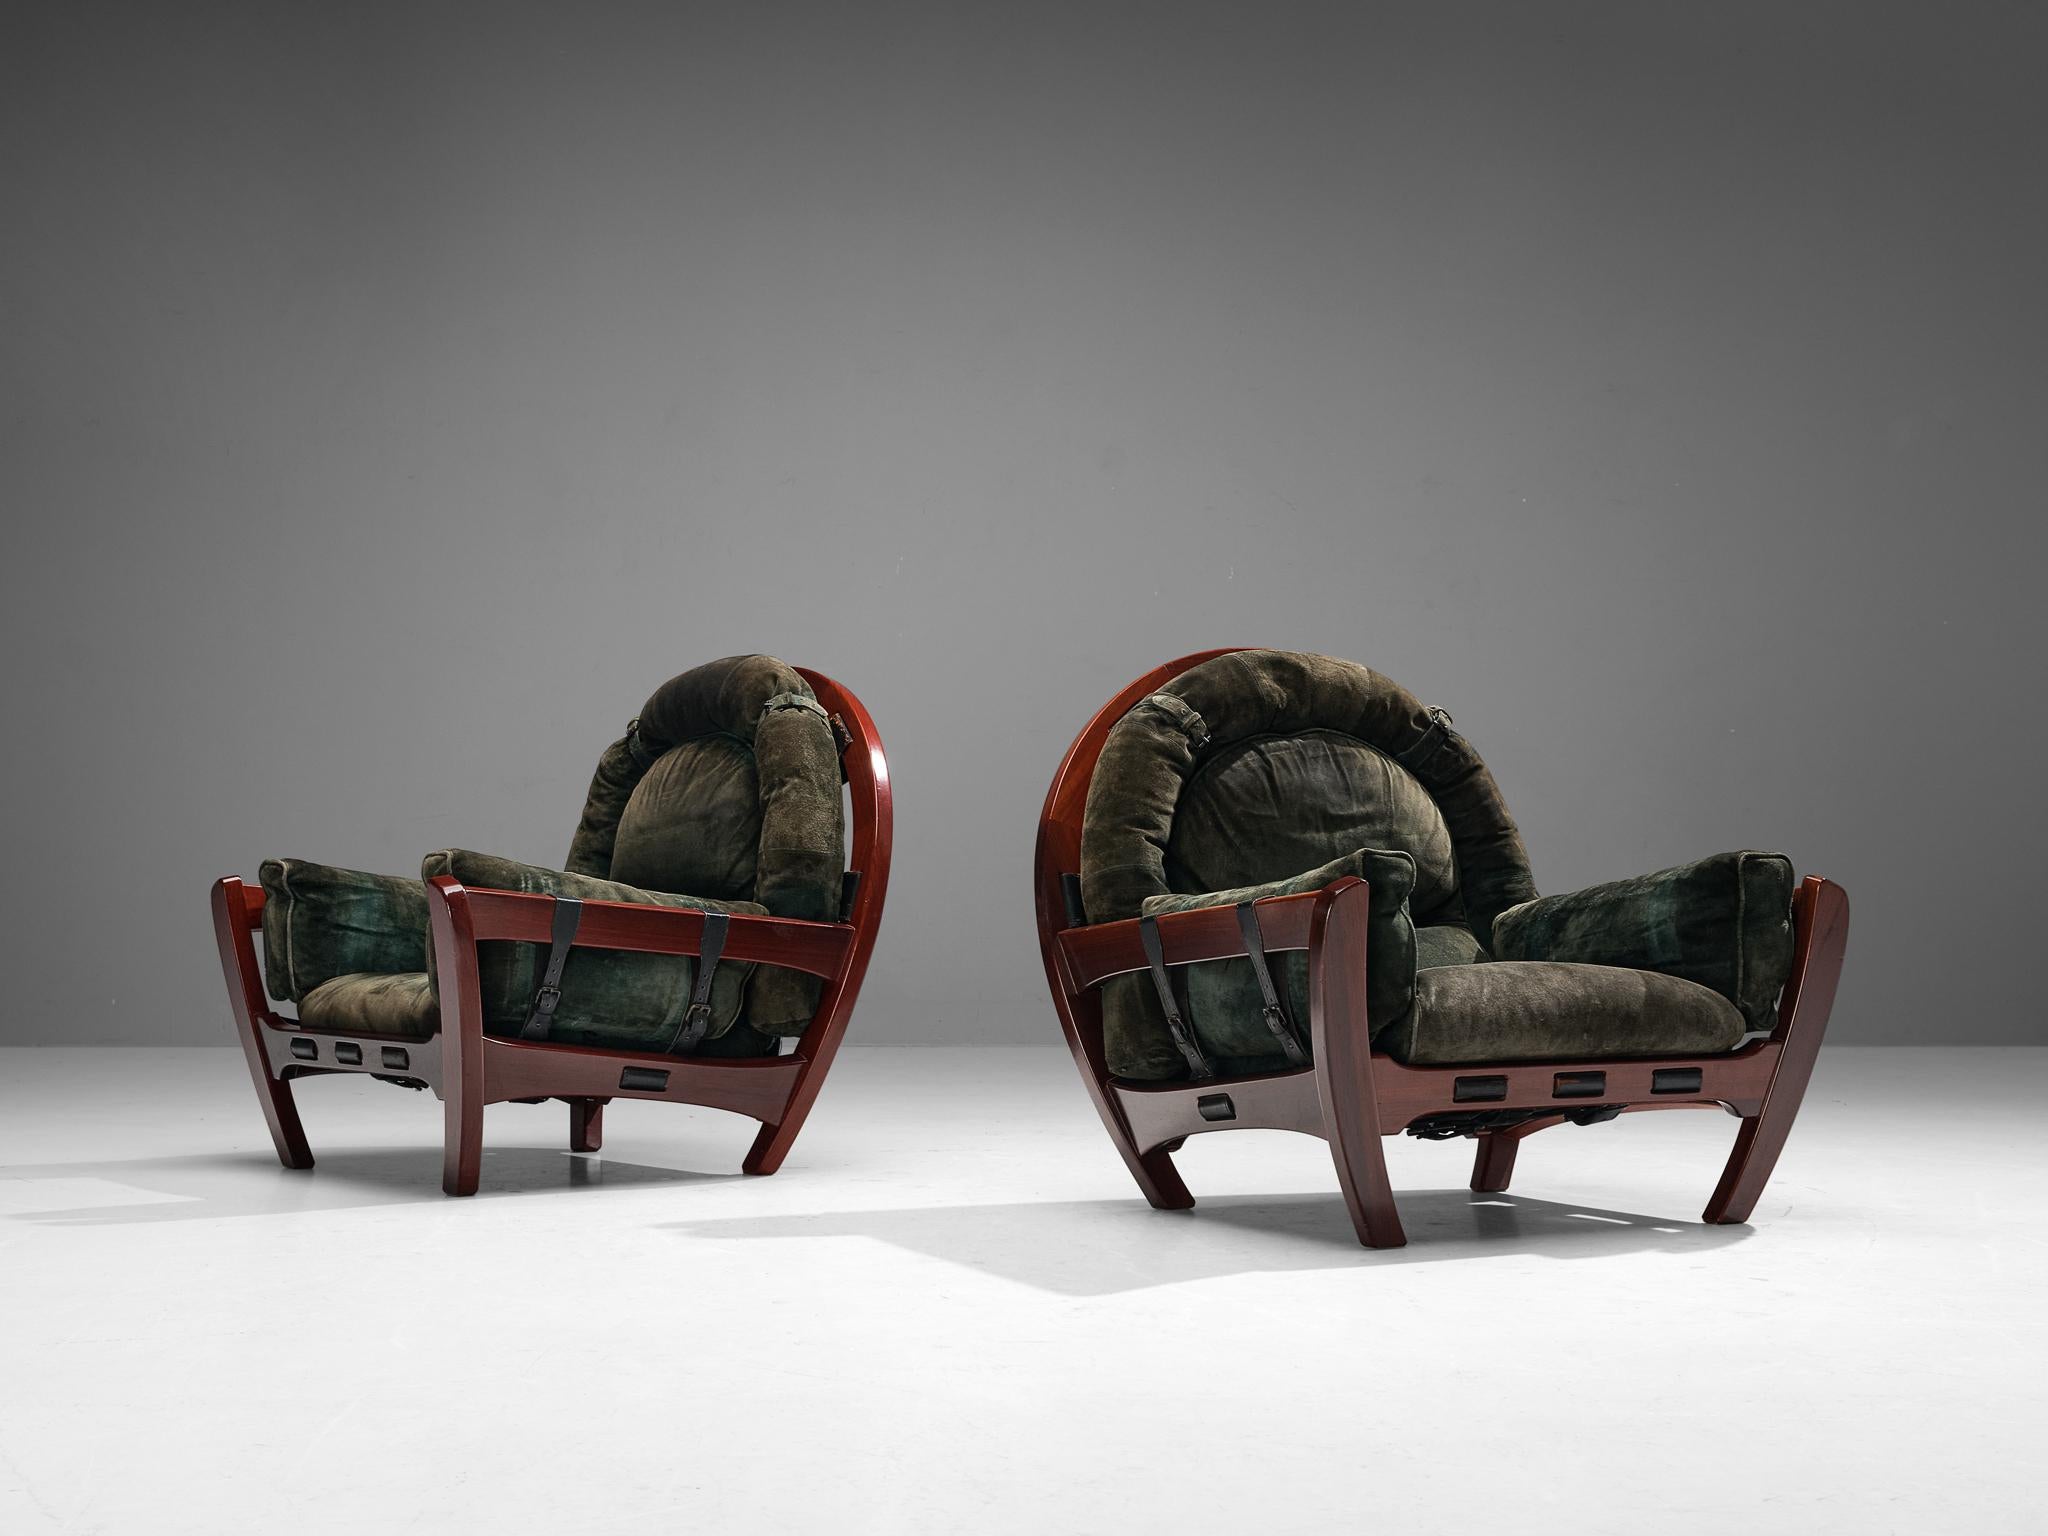  Luciano Frigerio Pair of 'Rancero' Lounge Chairs and Ottoman  2